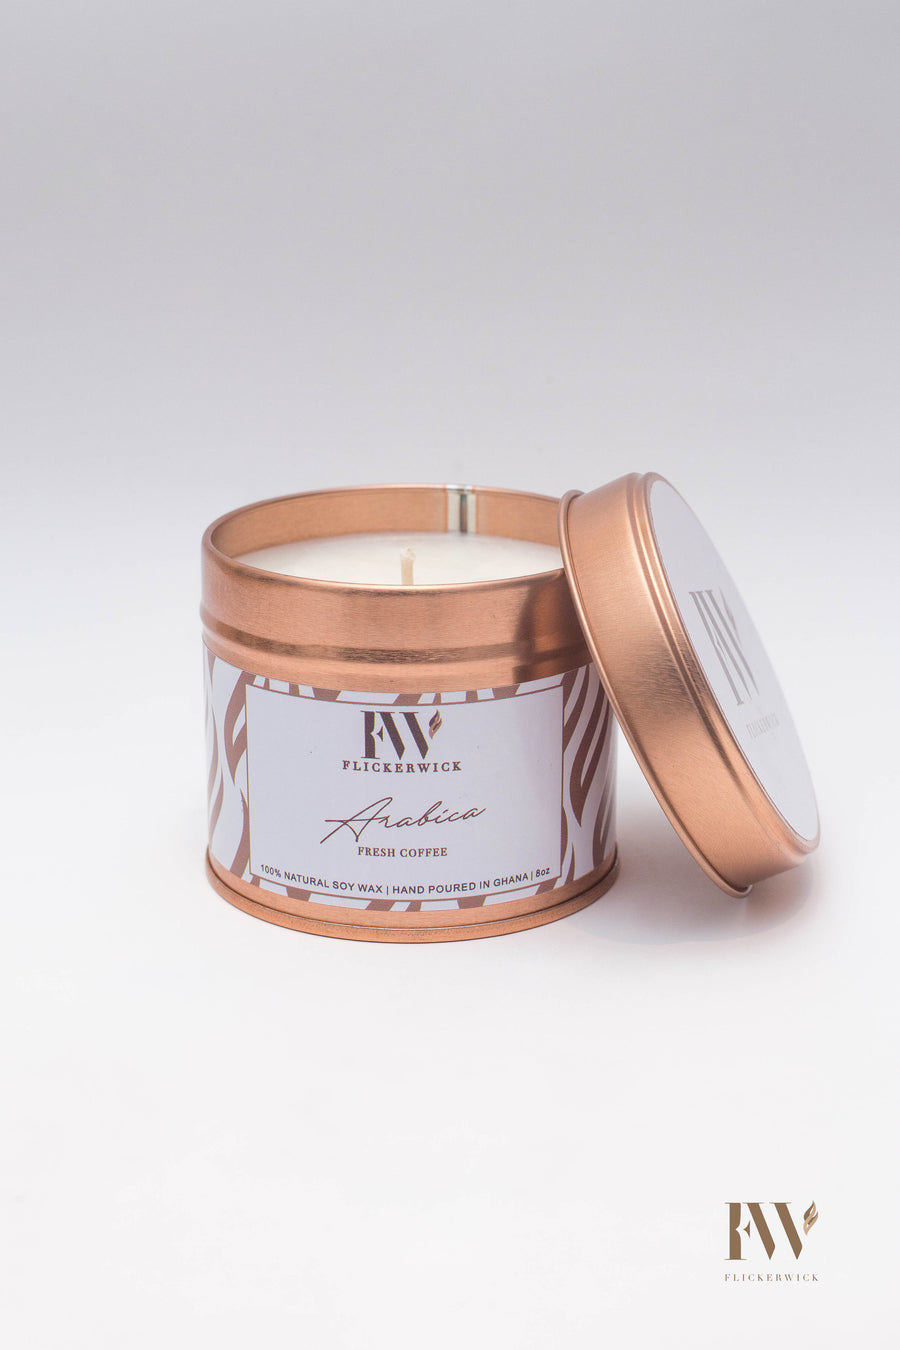 A candle in rose gold packaging from Flickerwick.